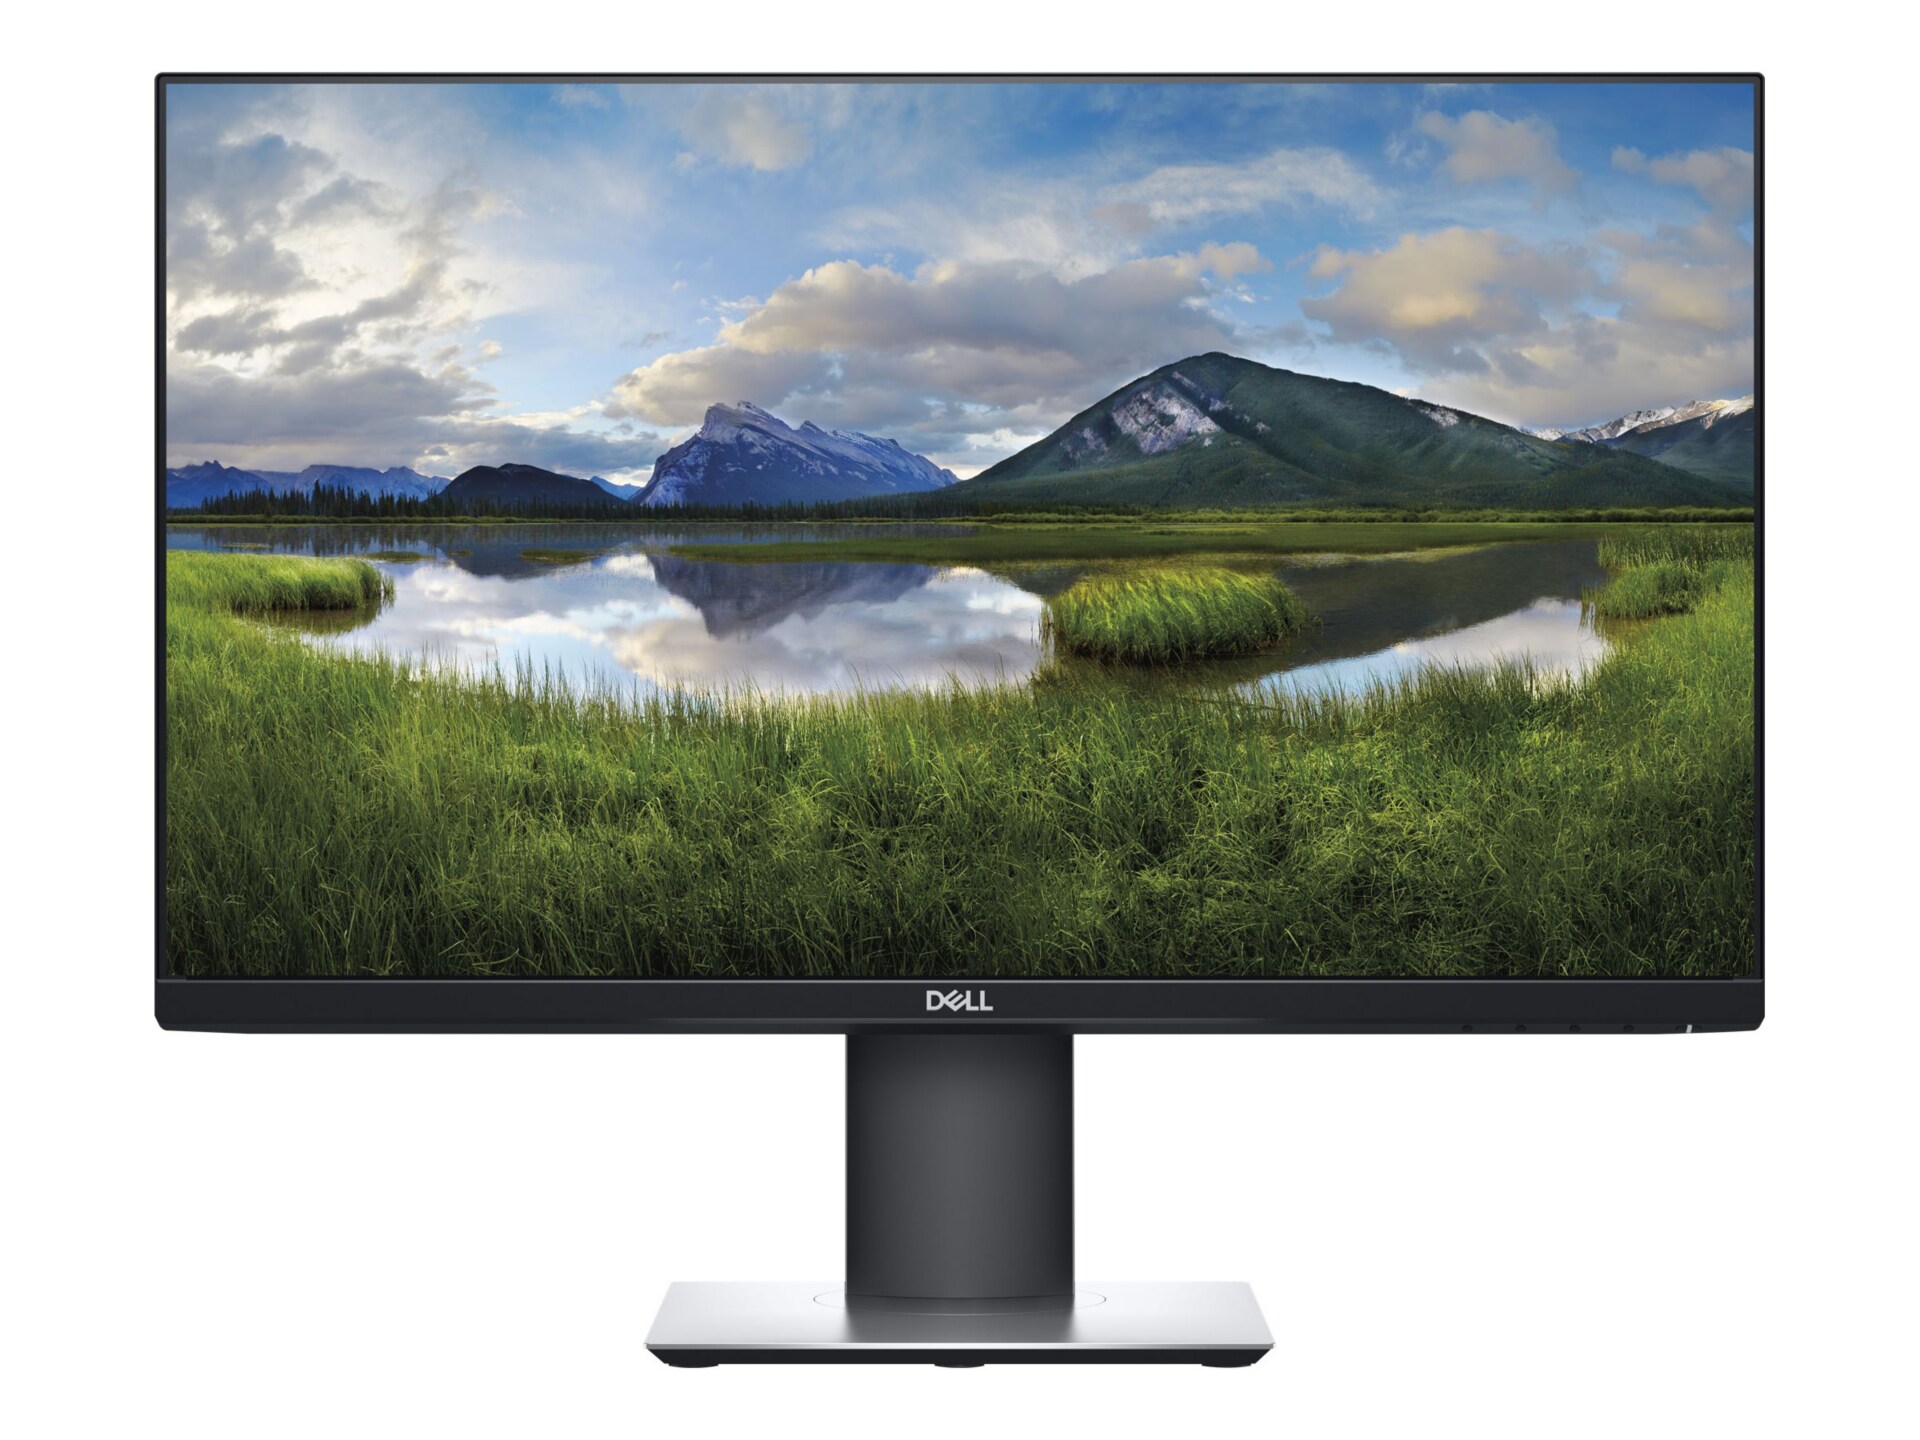 DELL 24IN MONITOR - P2419H (BSTK)